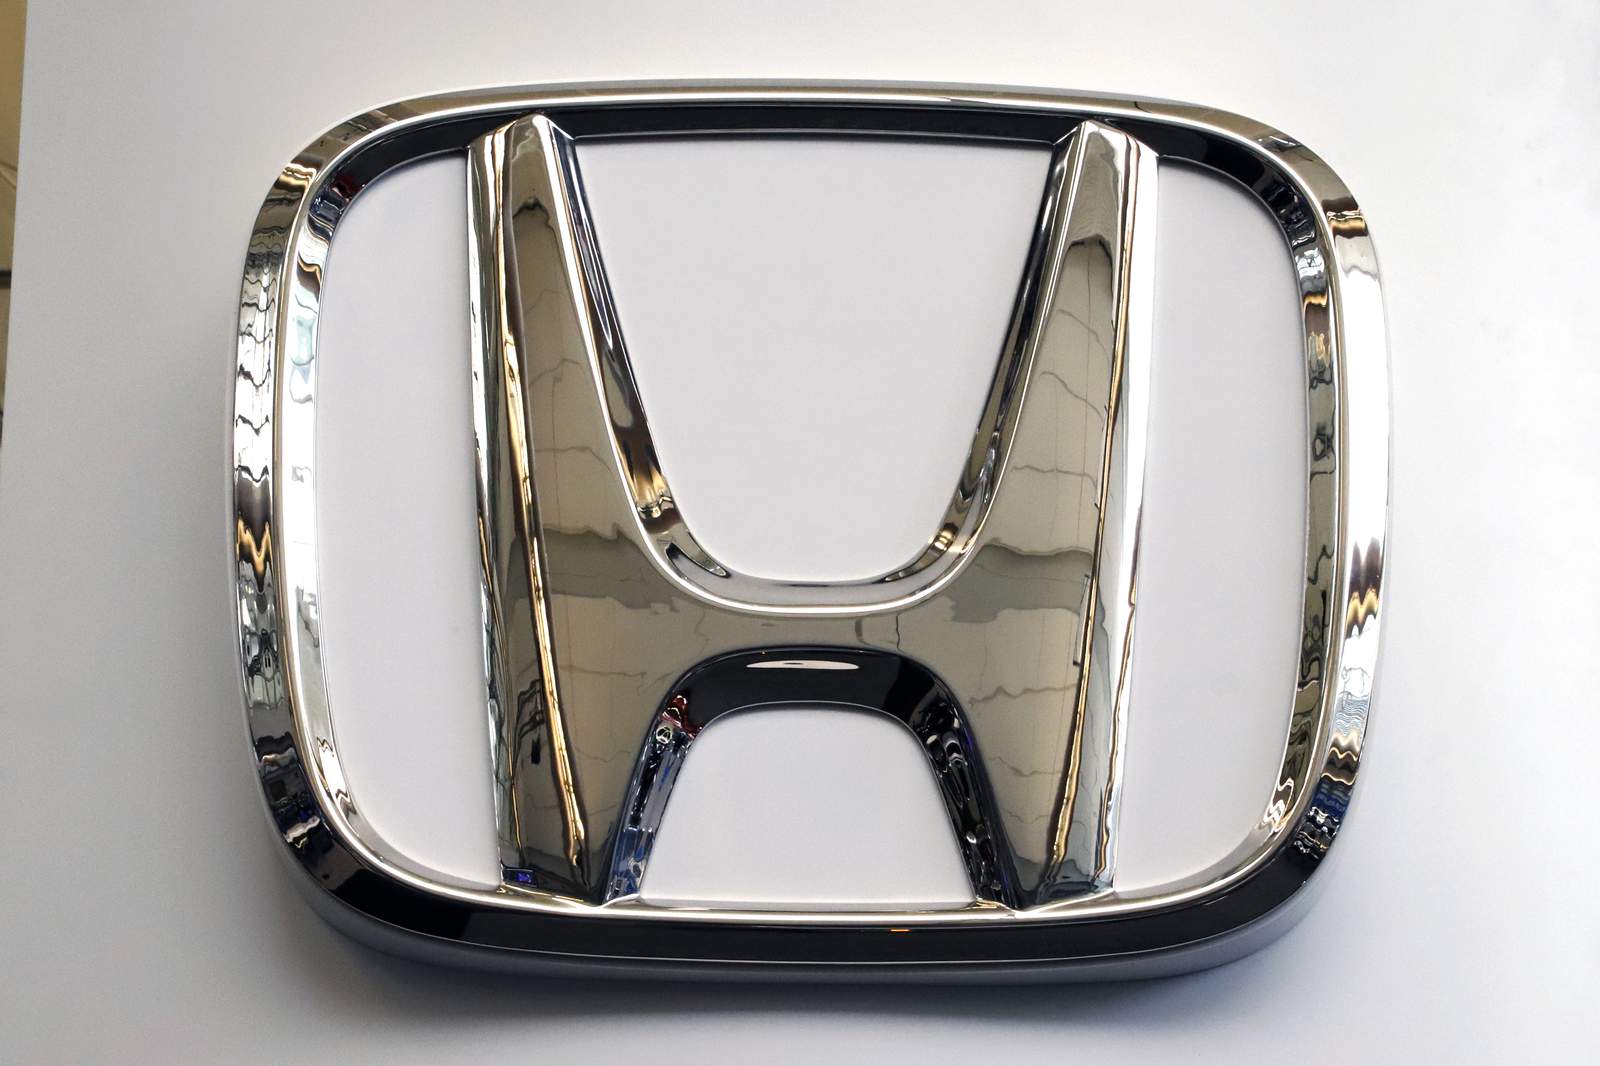 Honda of America plans to sell 2 fully electric SUVs in 2024